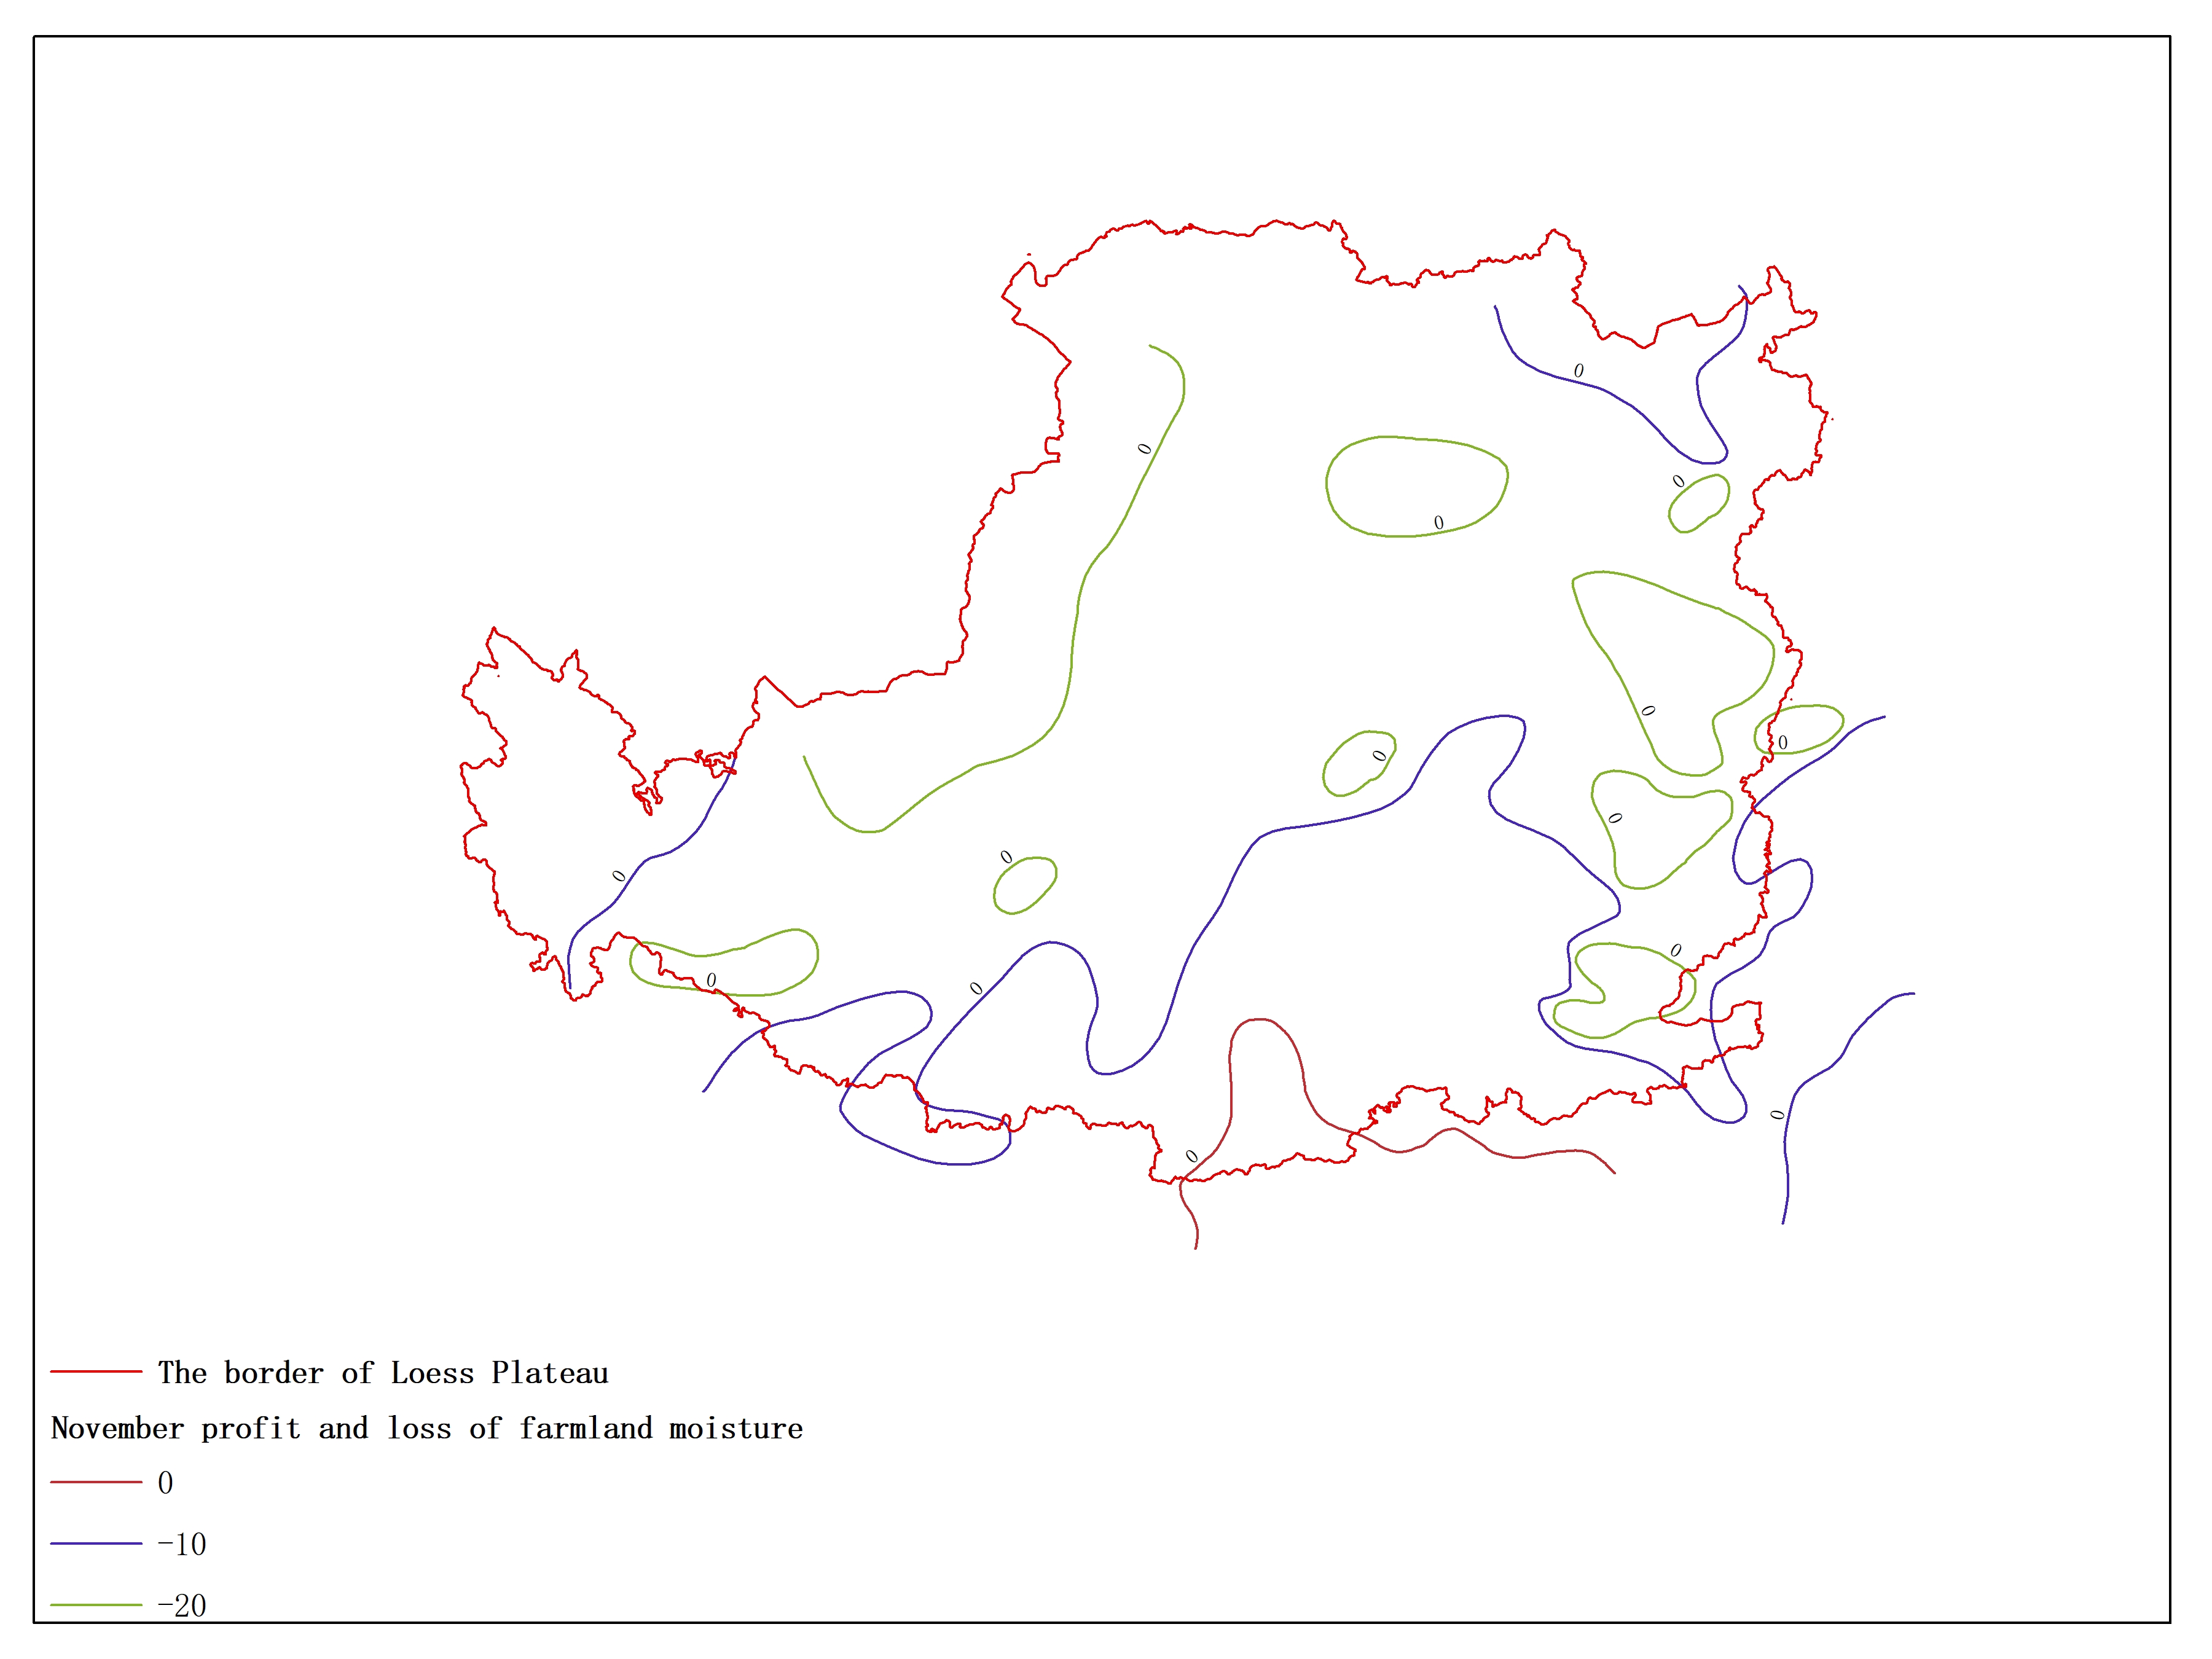 Agricultural climate resource atlas of Loess Plateau-November profit and loss of farmland moisture